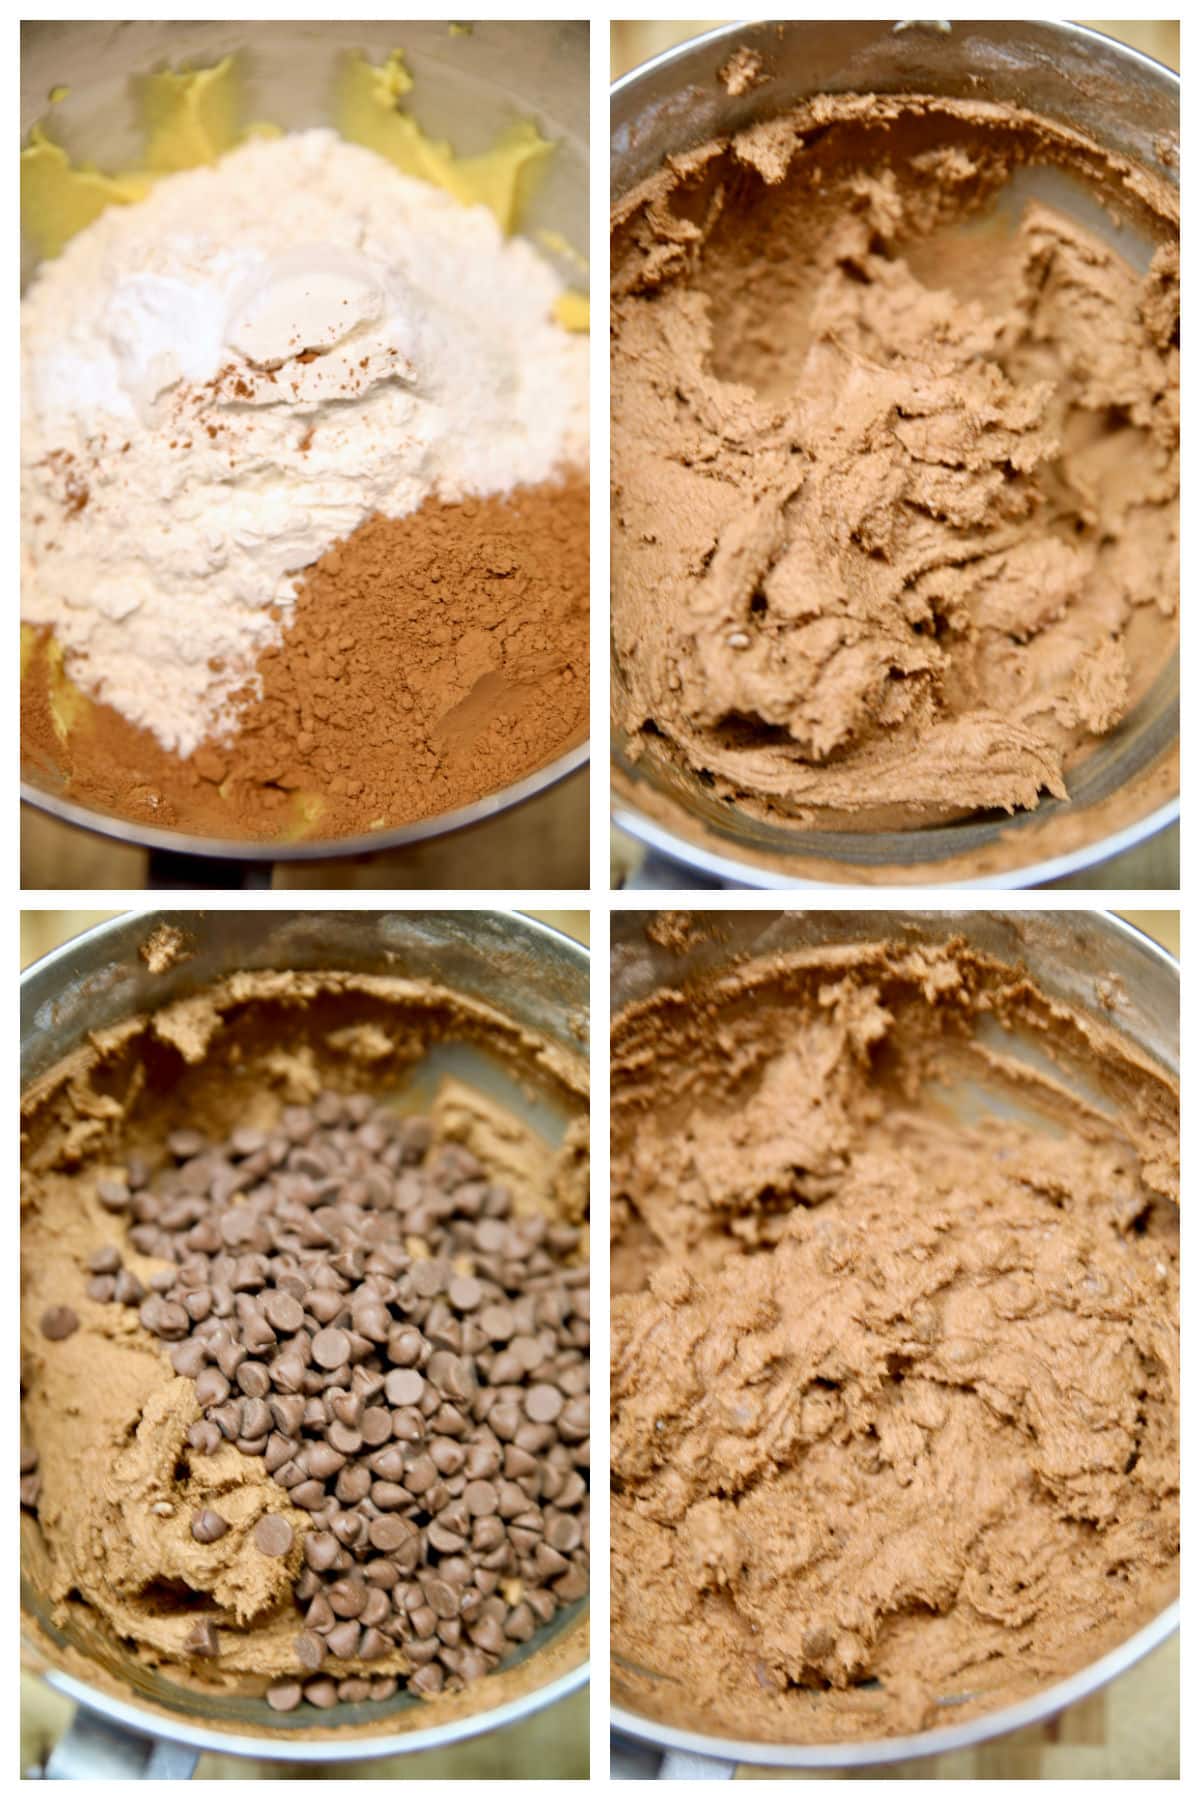 Making chocolate cookie dough with chocolate chips.